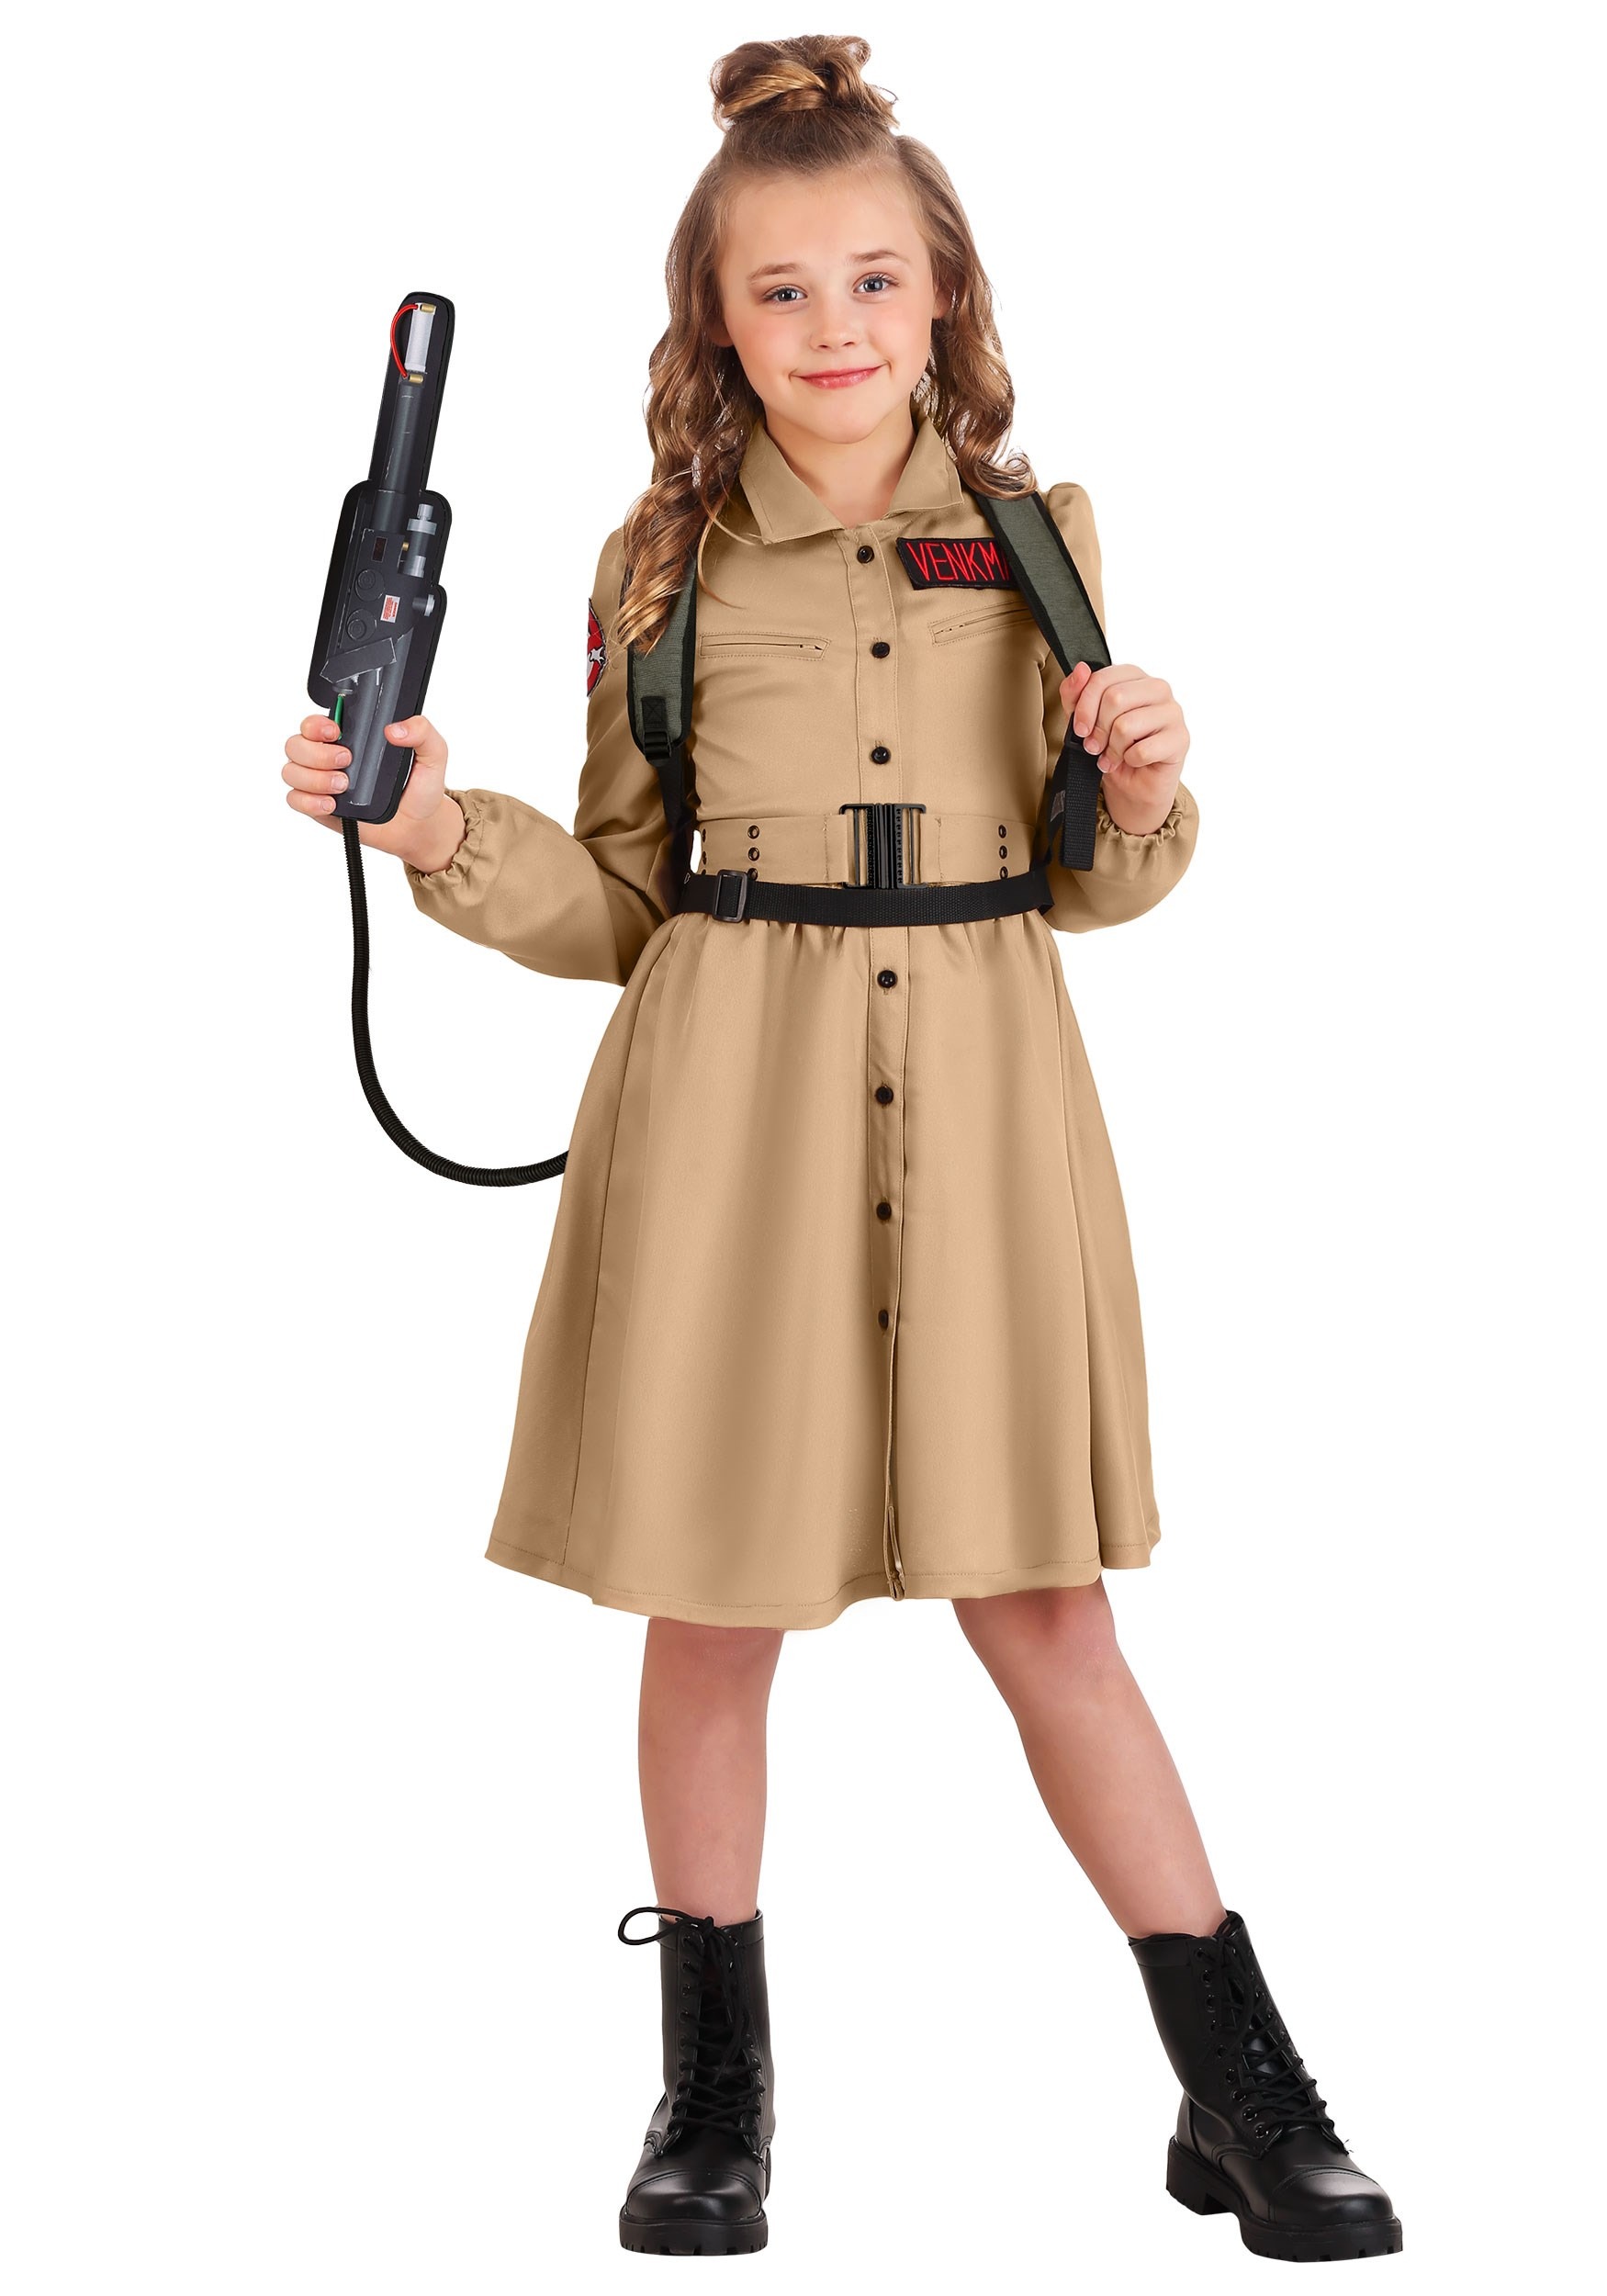 Photos - Fancy Dress Ghostbusters FUN Costumes  Costume Dress for Girls Black/Red/Beige 